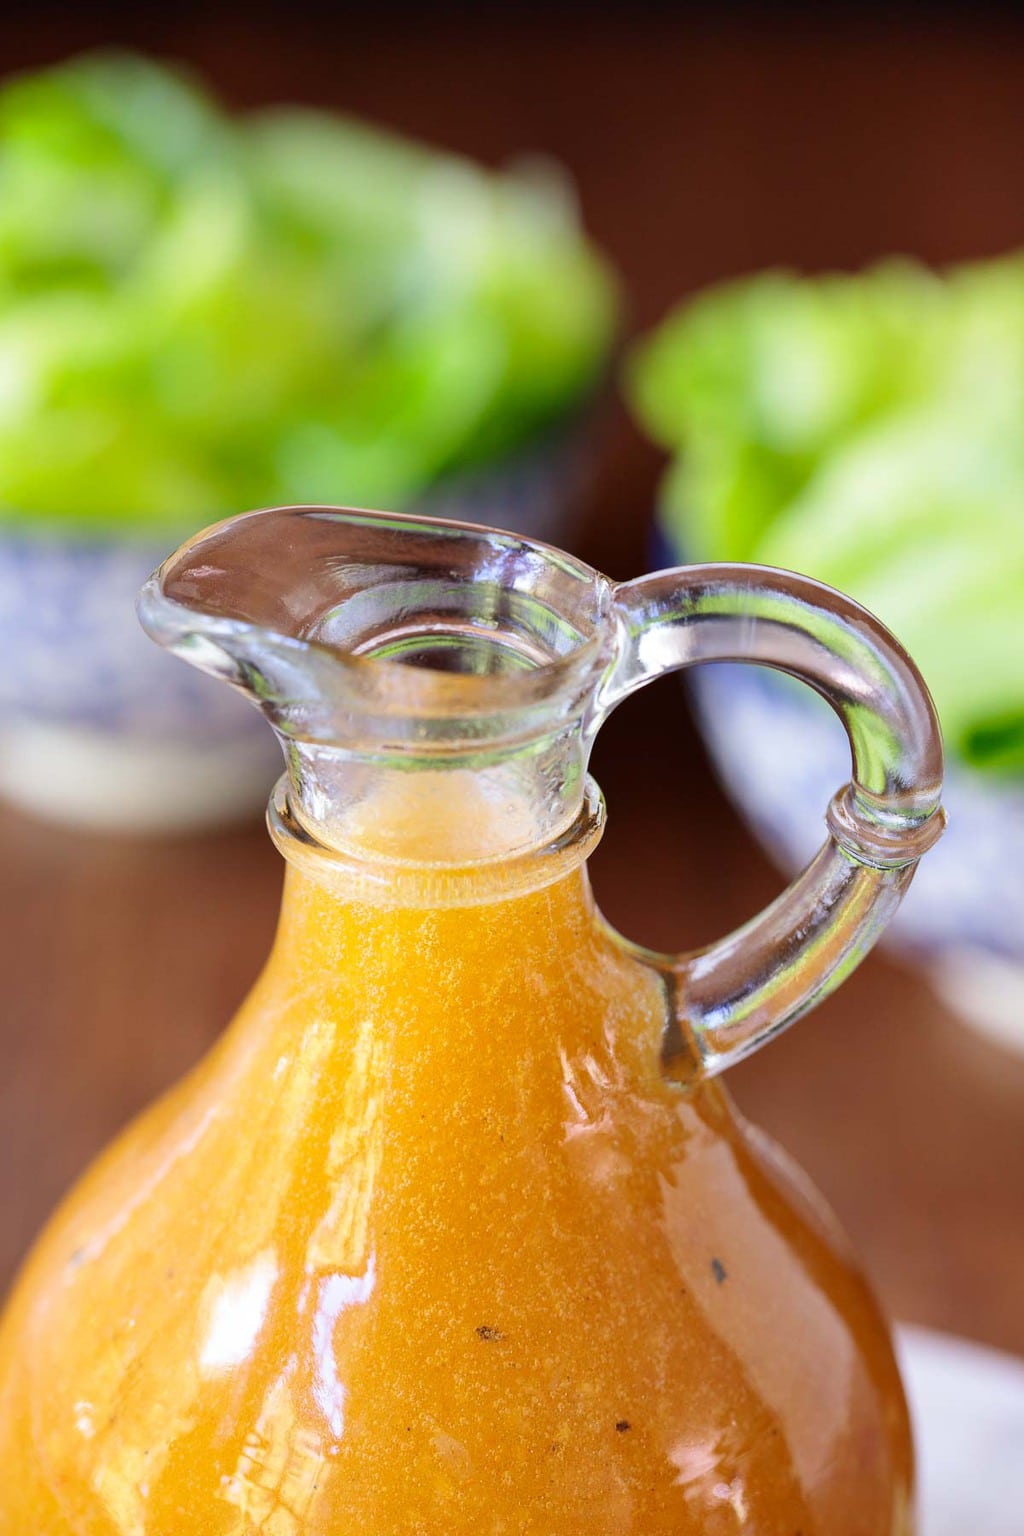 Closeup photo of a glass pitcher of Chili Lime Salad Dressing with bowls of salad in the background.